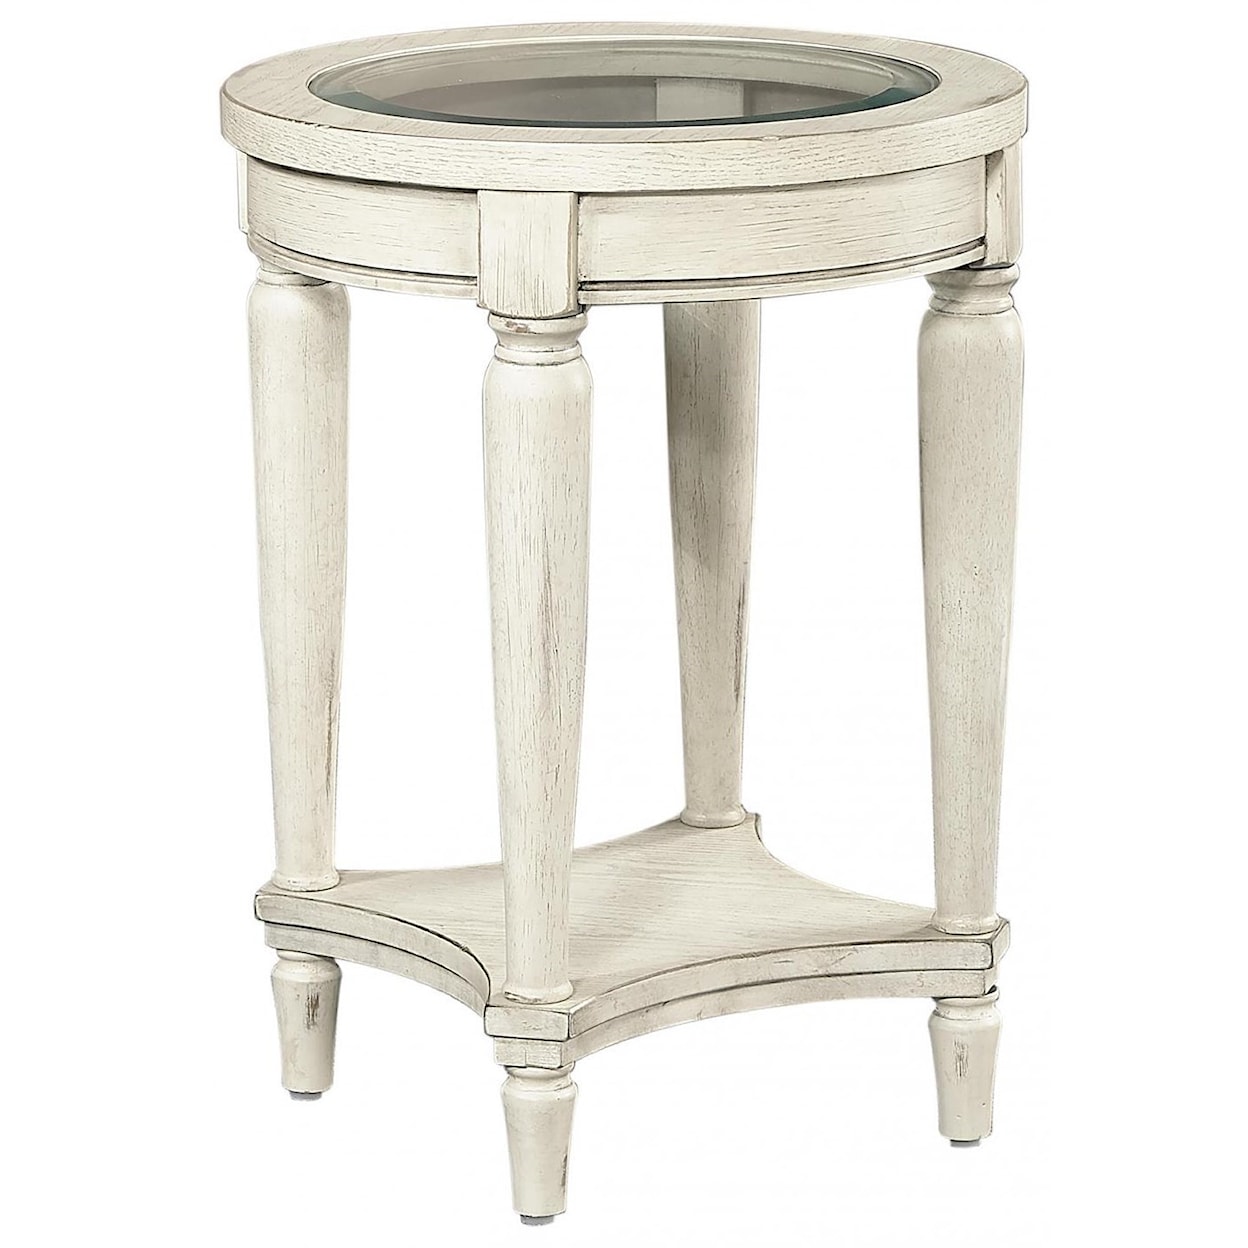 Aspenhome Compass Chairside table